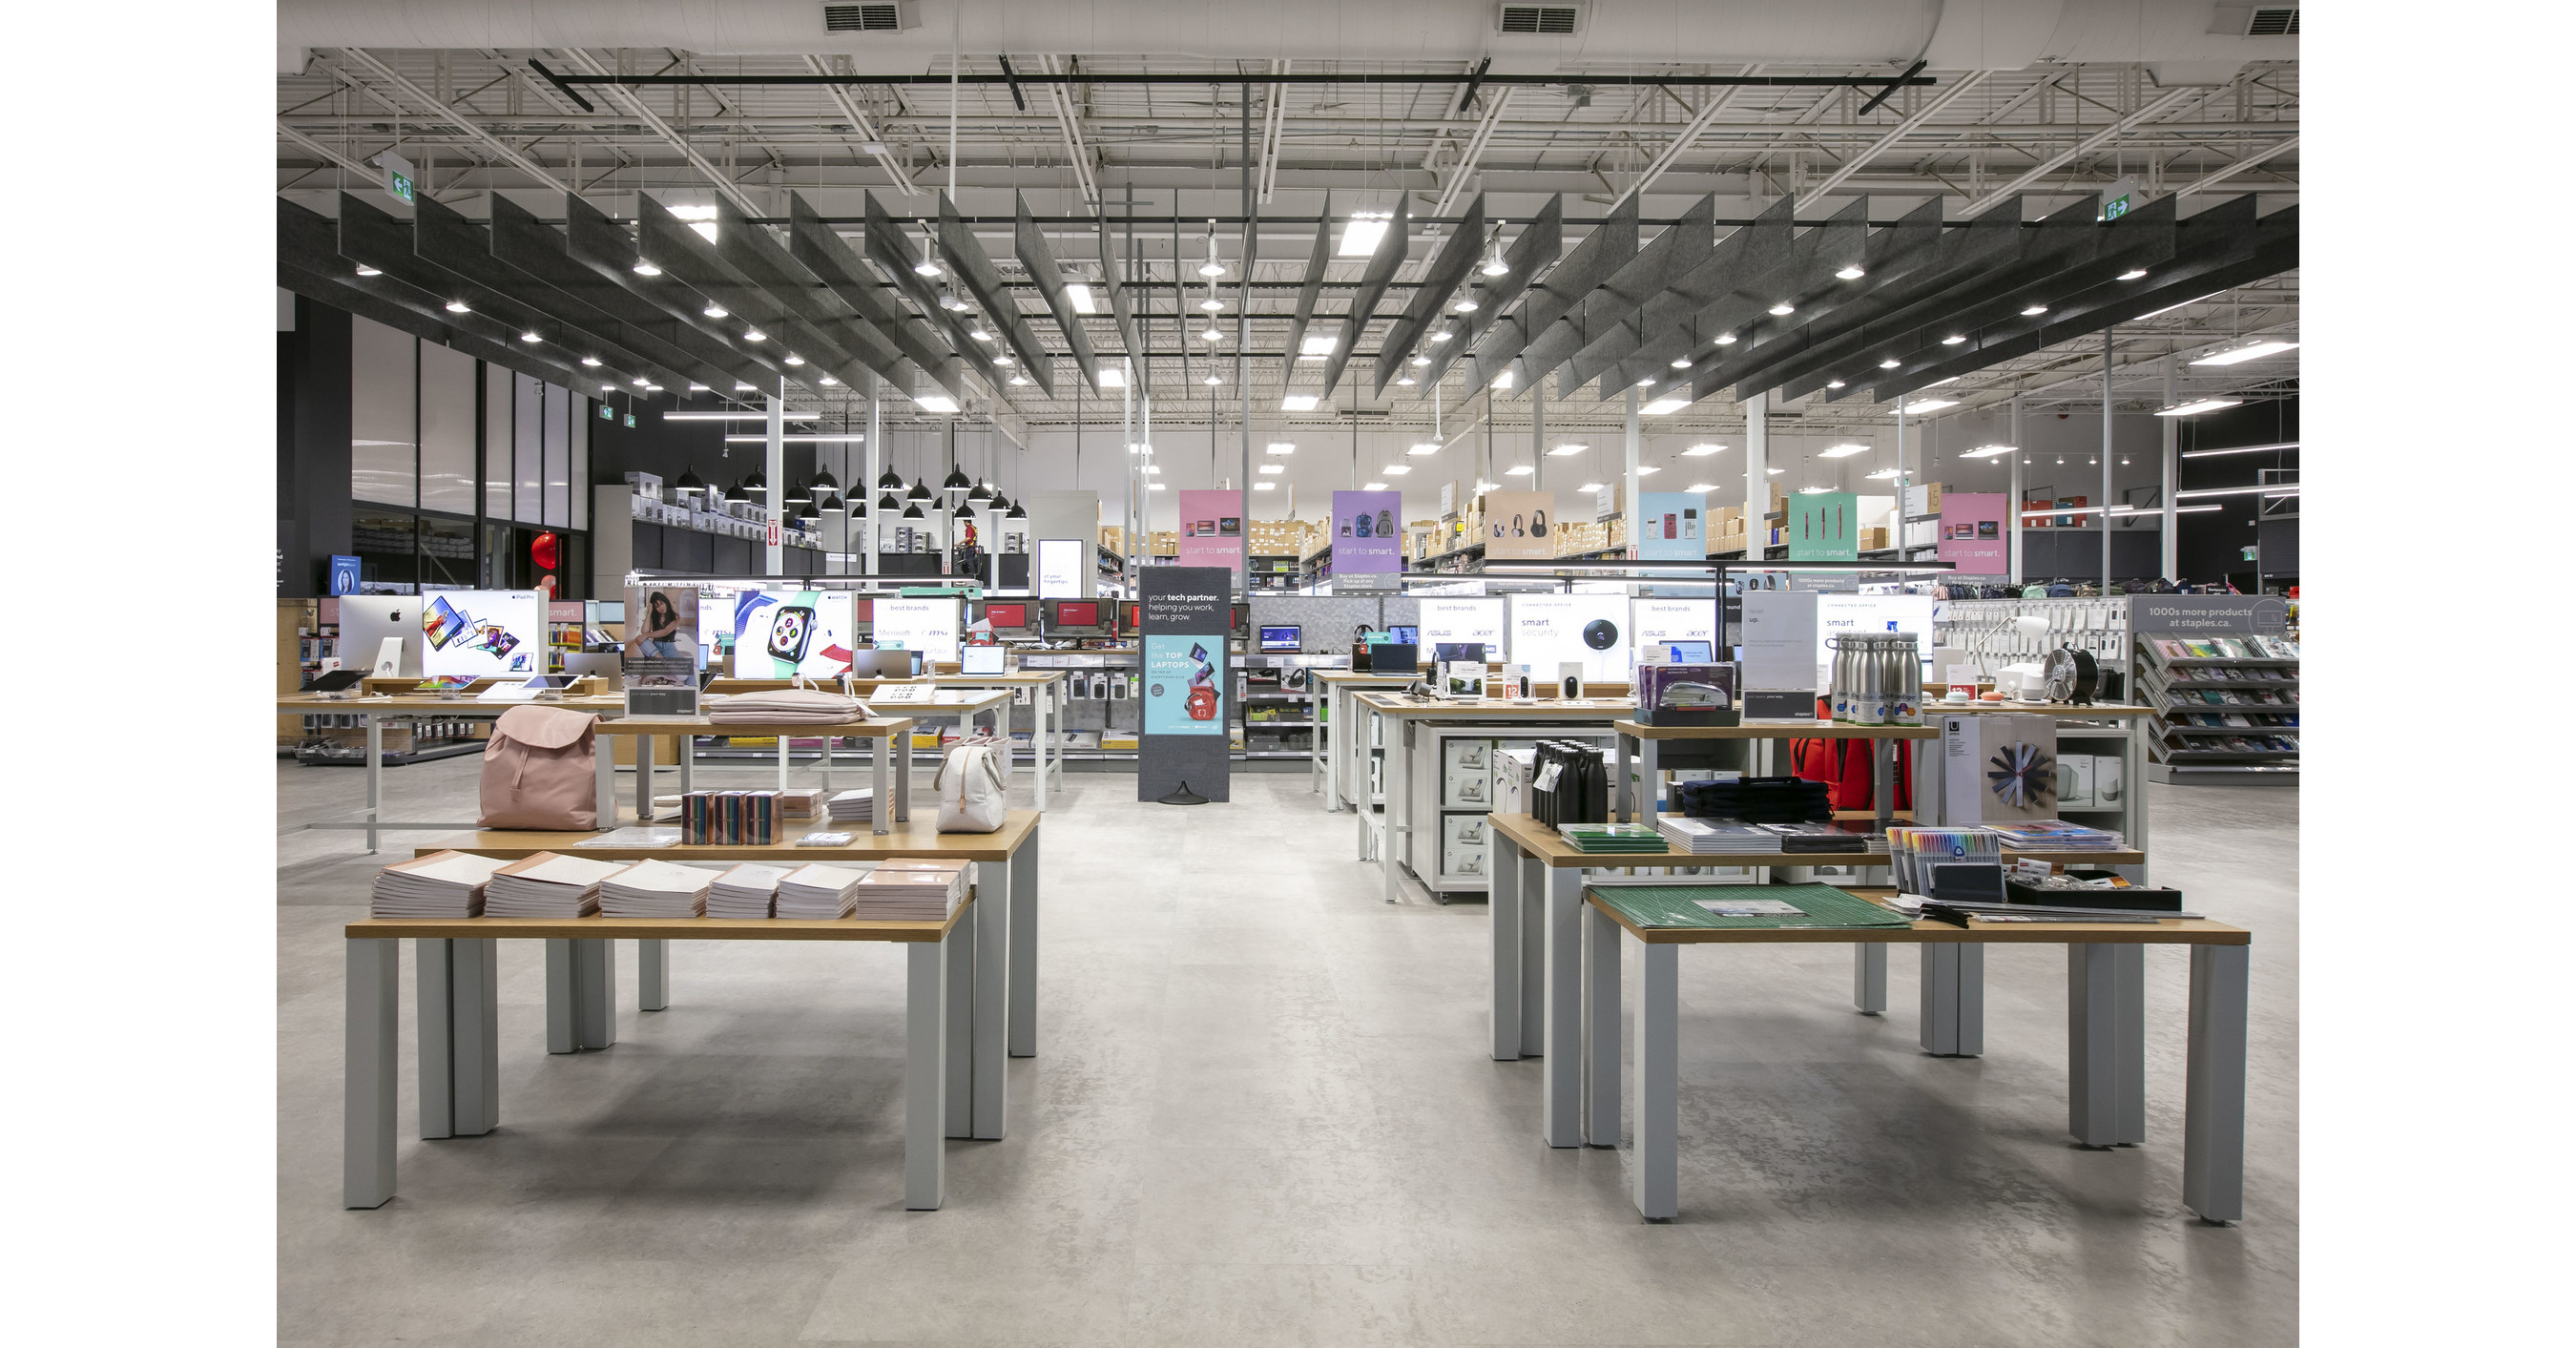 Staples Canada opens the Working and Learning Store concept in Oakville,  featuring a new coworking space, thousands of new products and elxr juice  lab